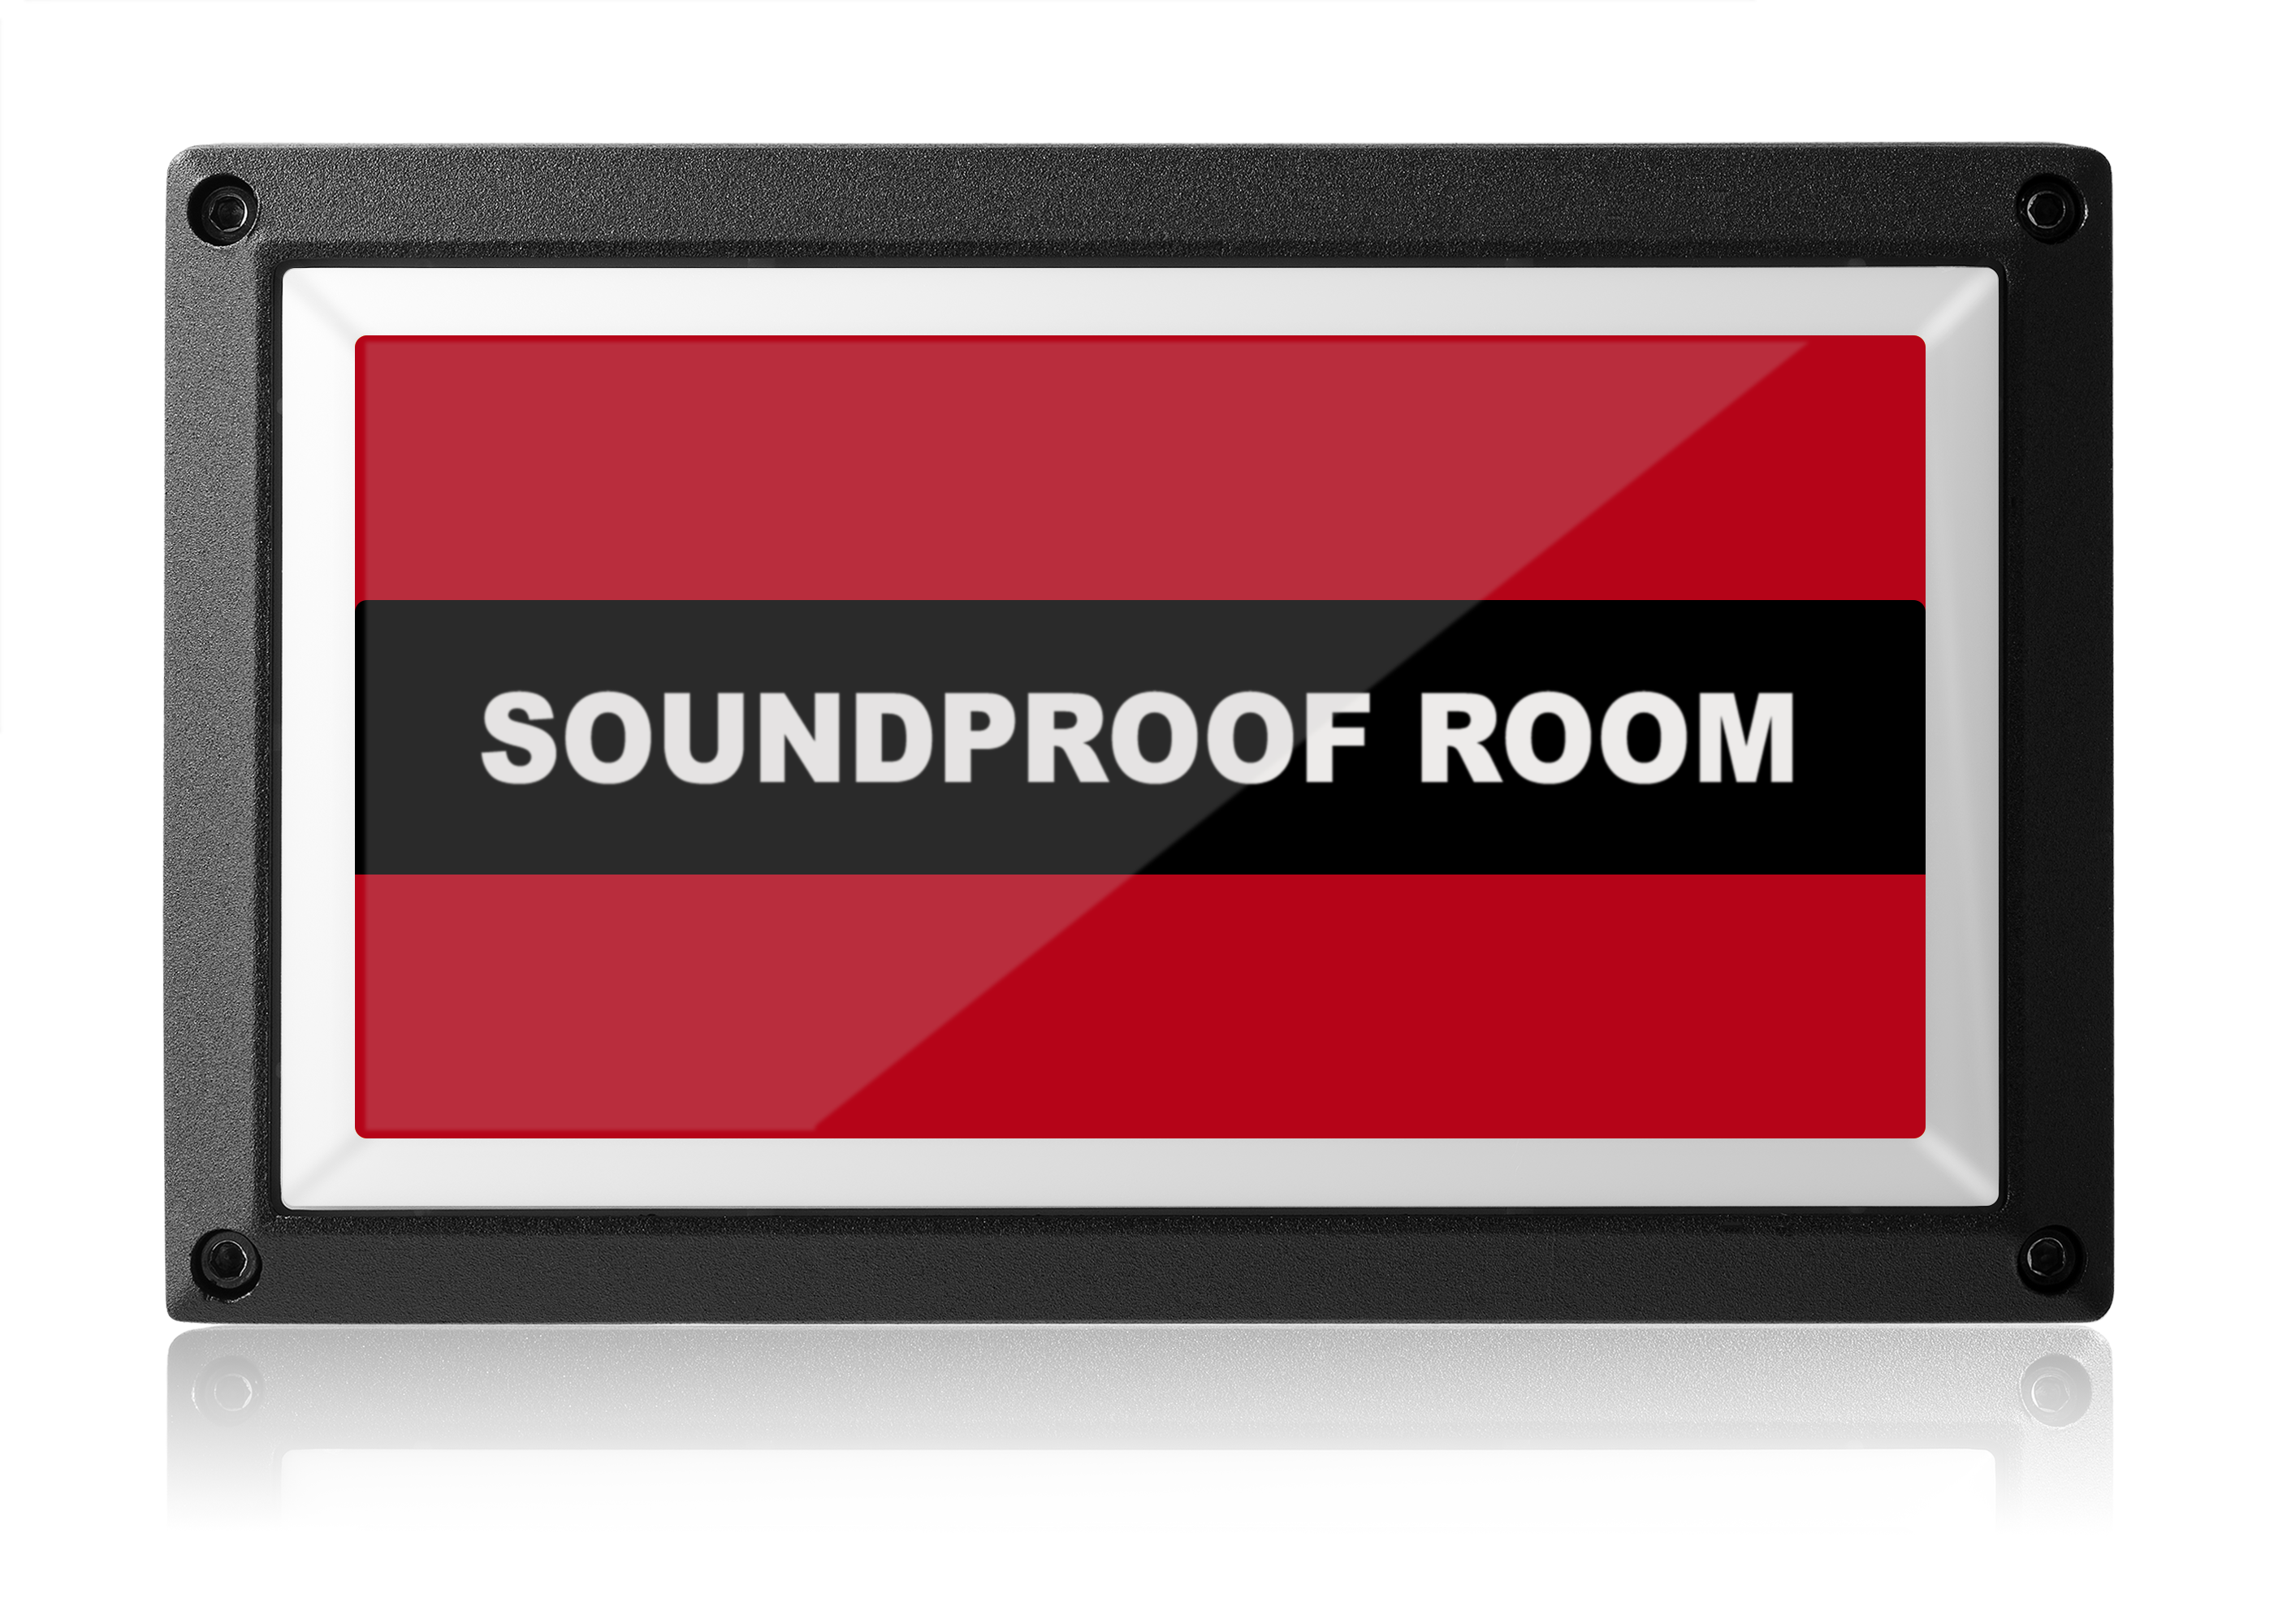 Soundproof Room Light - Red ISO - Rekall Dynamics LED Sign-Red-Low Voltage (12-24v DC)-